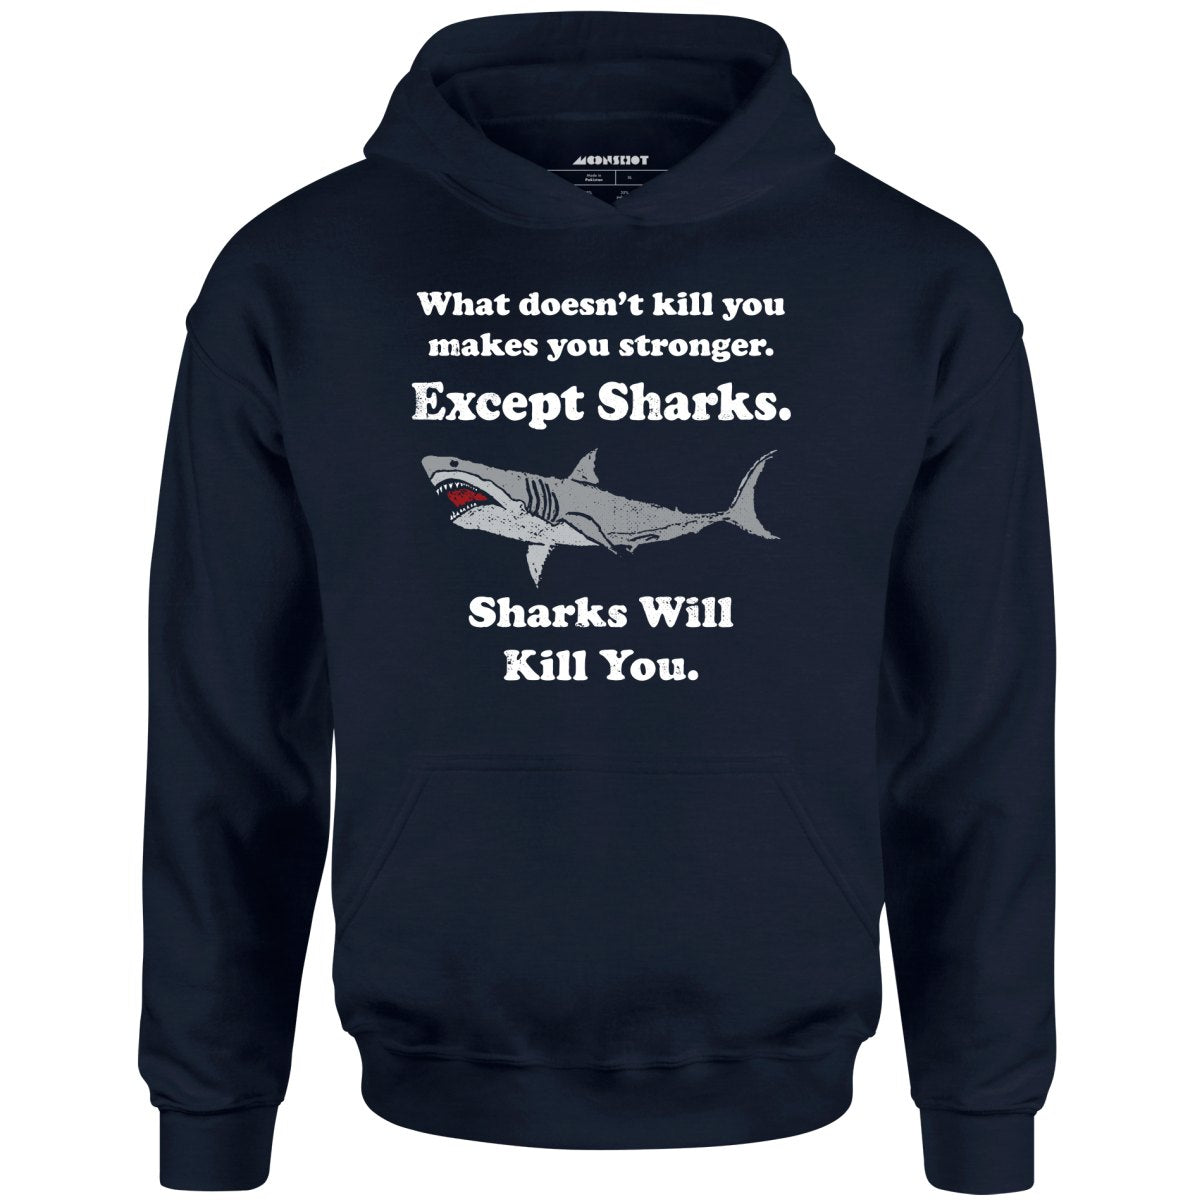 Sharks Will Kill You - Unisex Hoodie